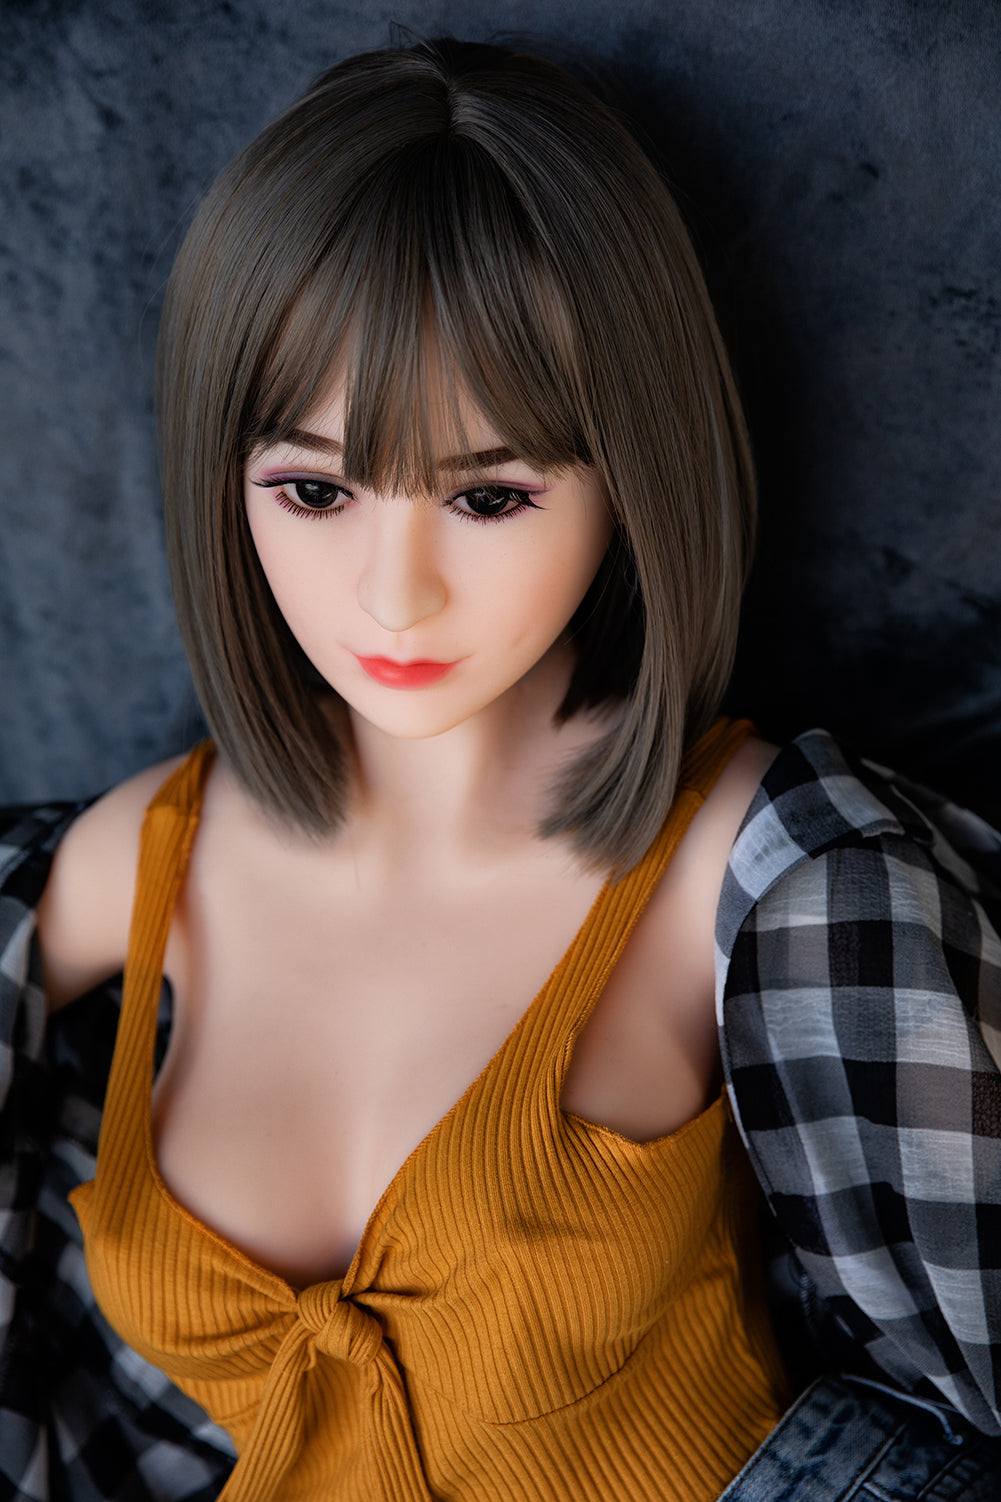 160 cm young and slim life size sex doll SY Doll ASHLEY